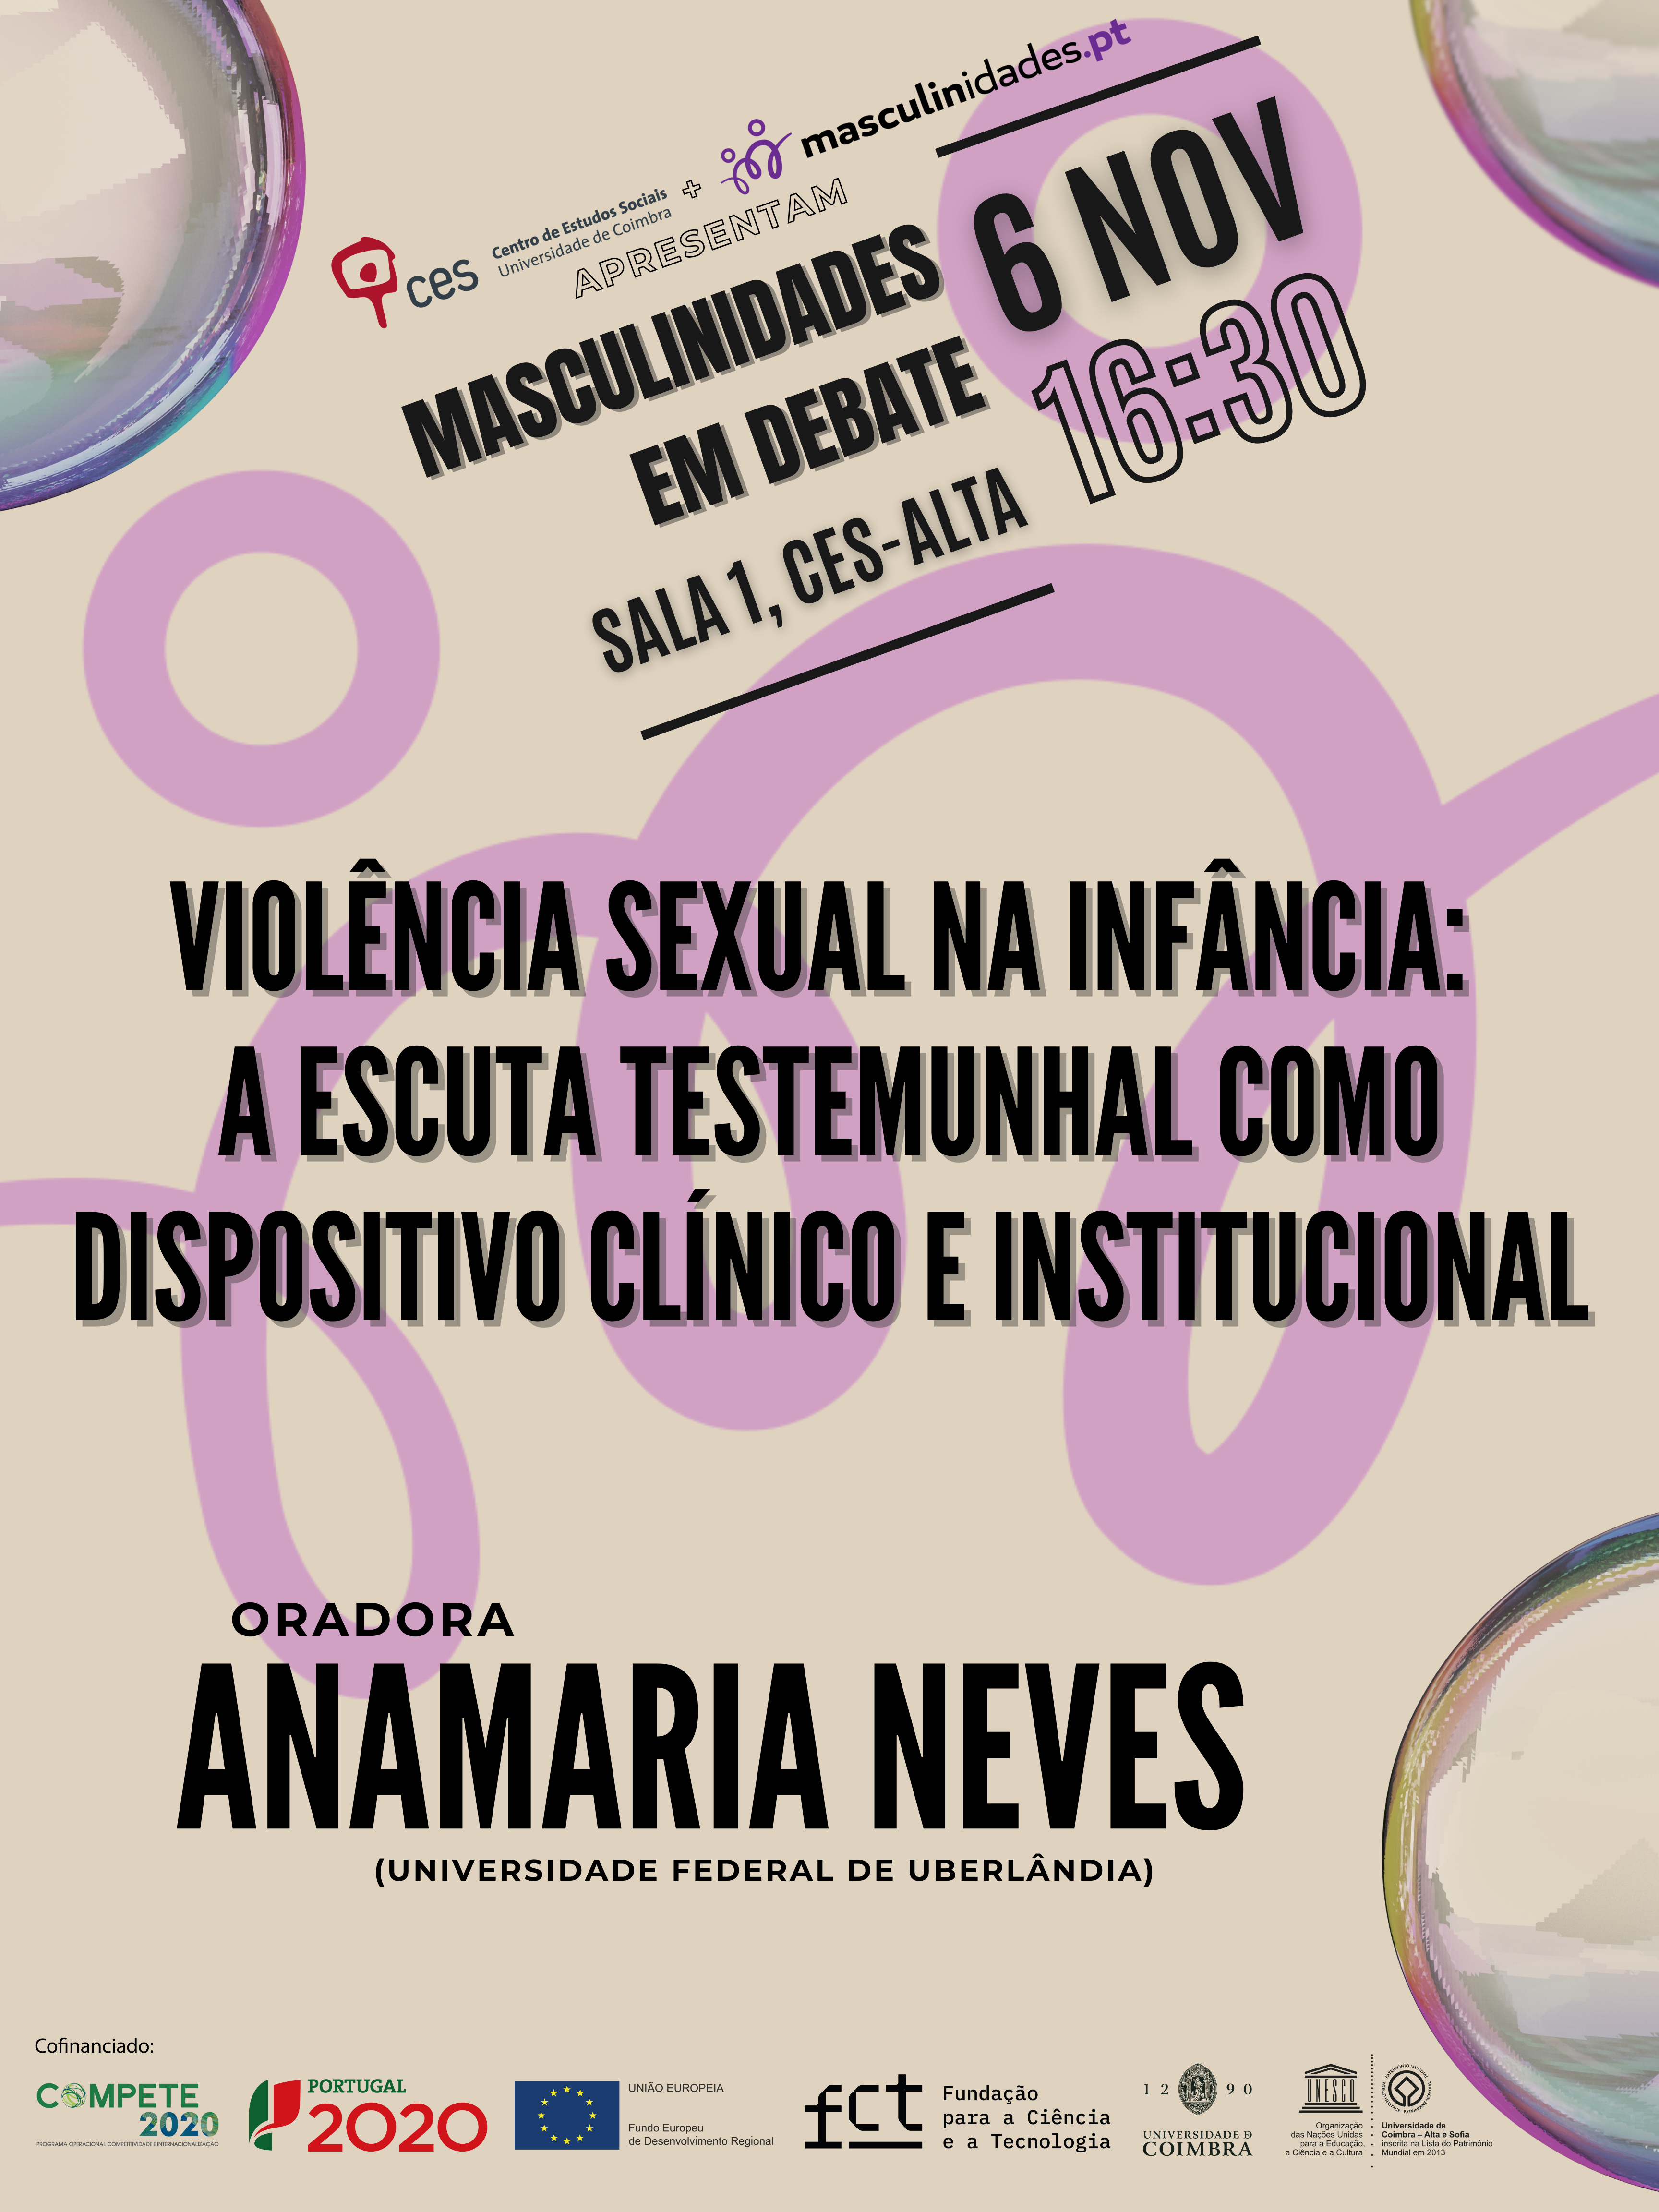 Sexual violence in childhood: testimonial listening as a clinical and institutional device<span id="edit_44079"><script>$(function() { $('#edit_44079').load( "/myces/user/editobj.php?tipo=evento&id=44079" ); });</script></span>